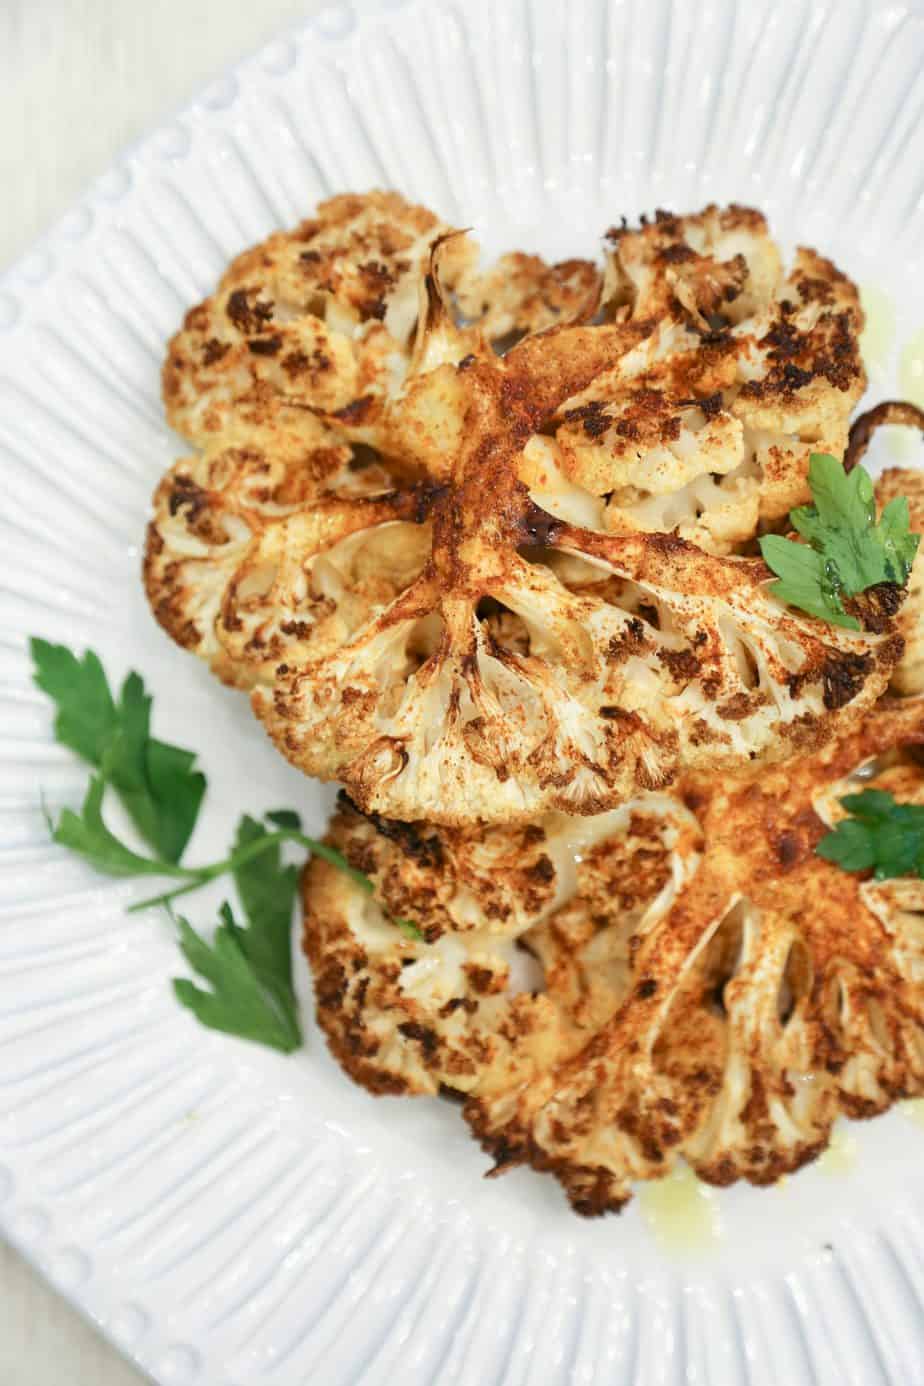 Air fryer cauliflower steaks made with Peruvian spice blend on a white plate garnished with parsley and olive oil.